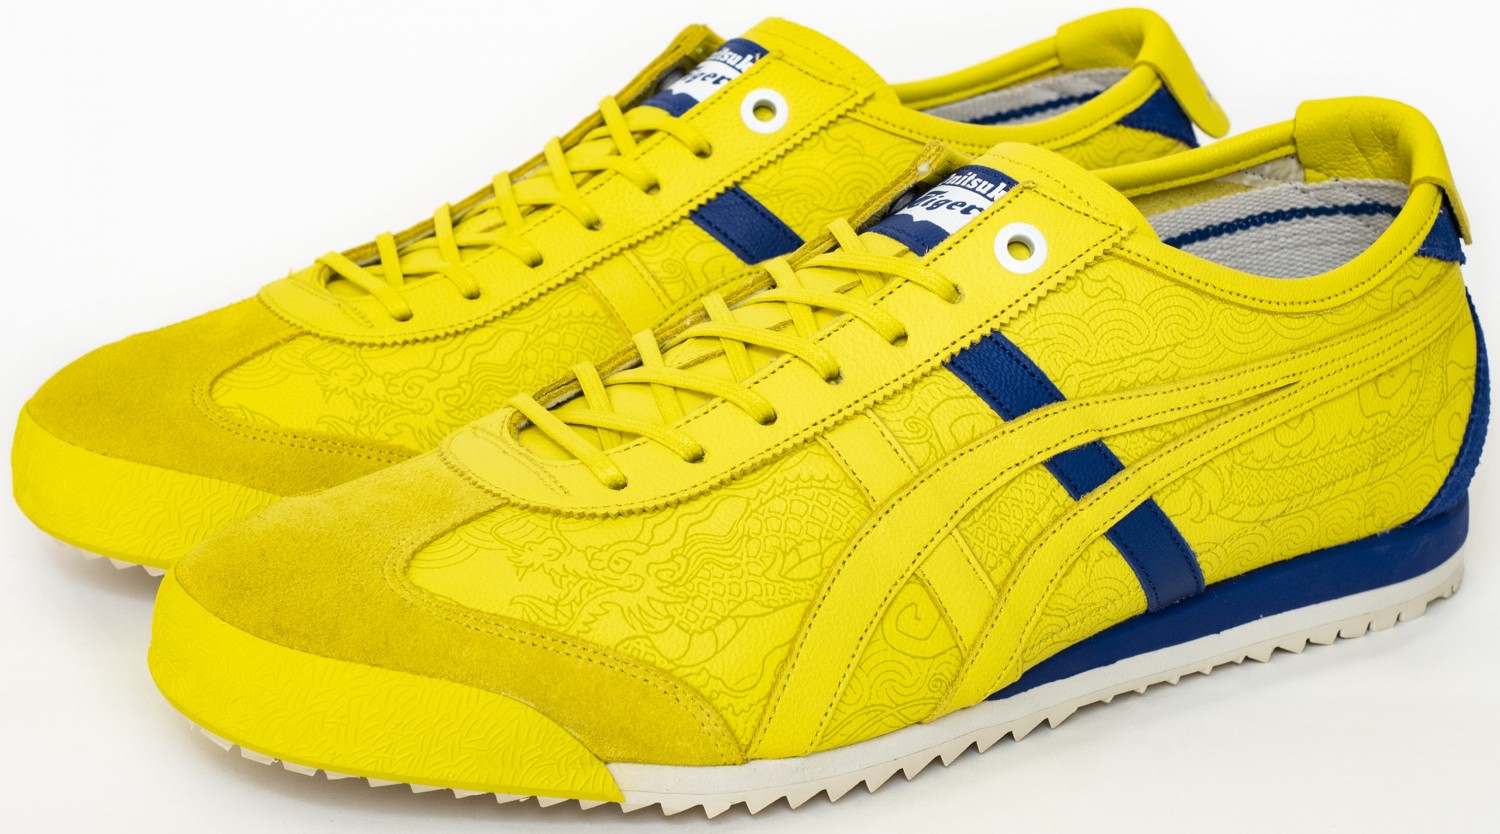 Get Your Lightning Kicks On With These Limited-Edition Onitsuka Tiger ...